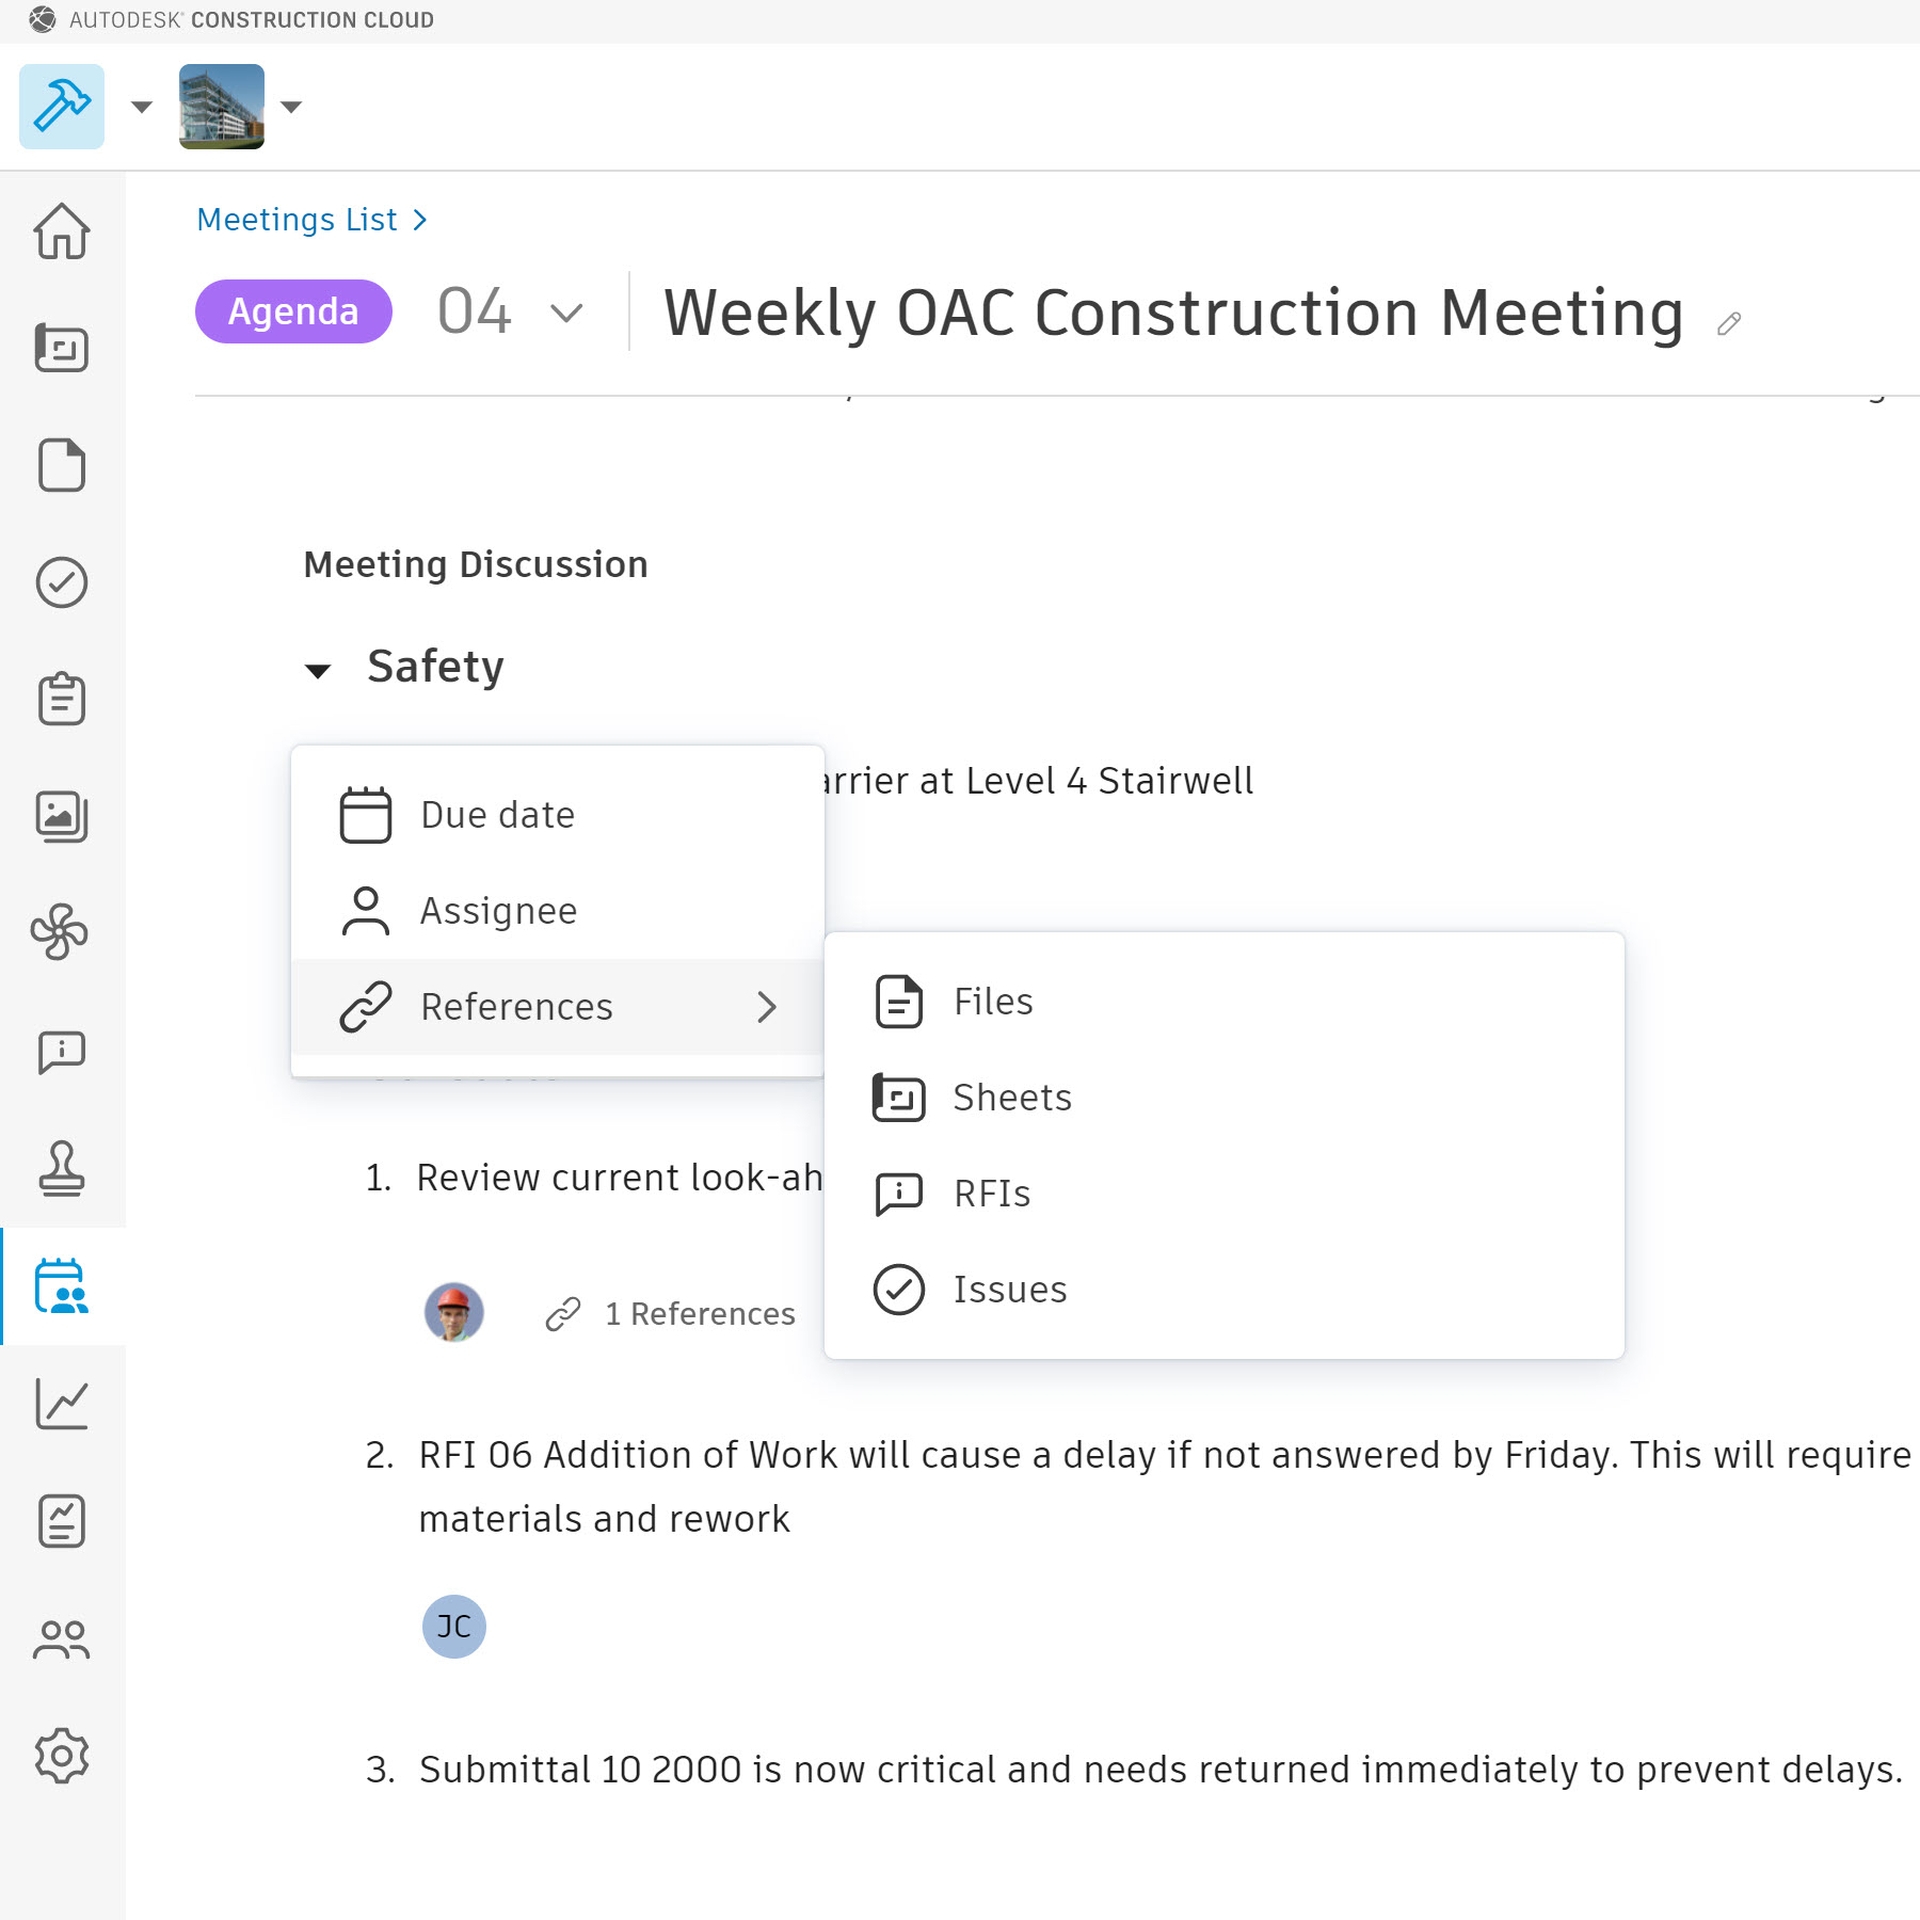 OAC meeting software in Construction Meetings Record Software.